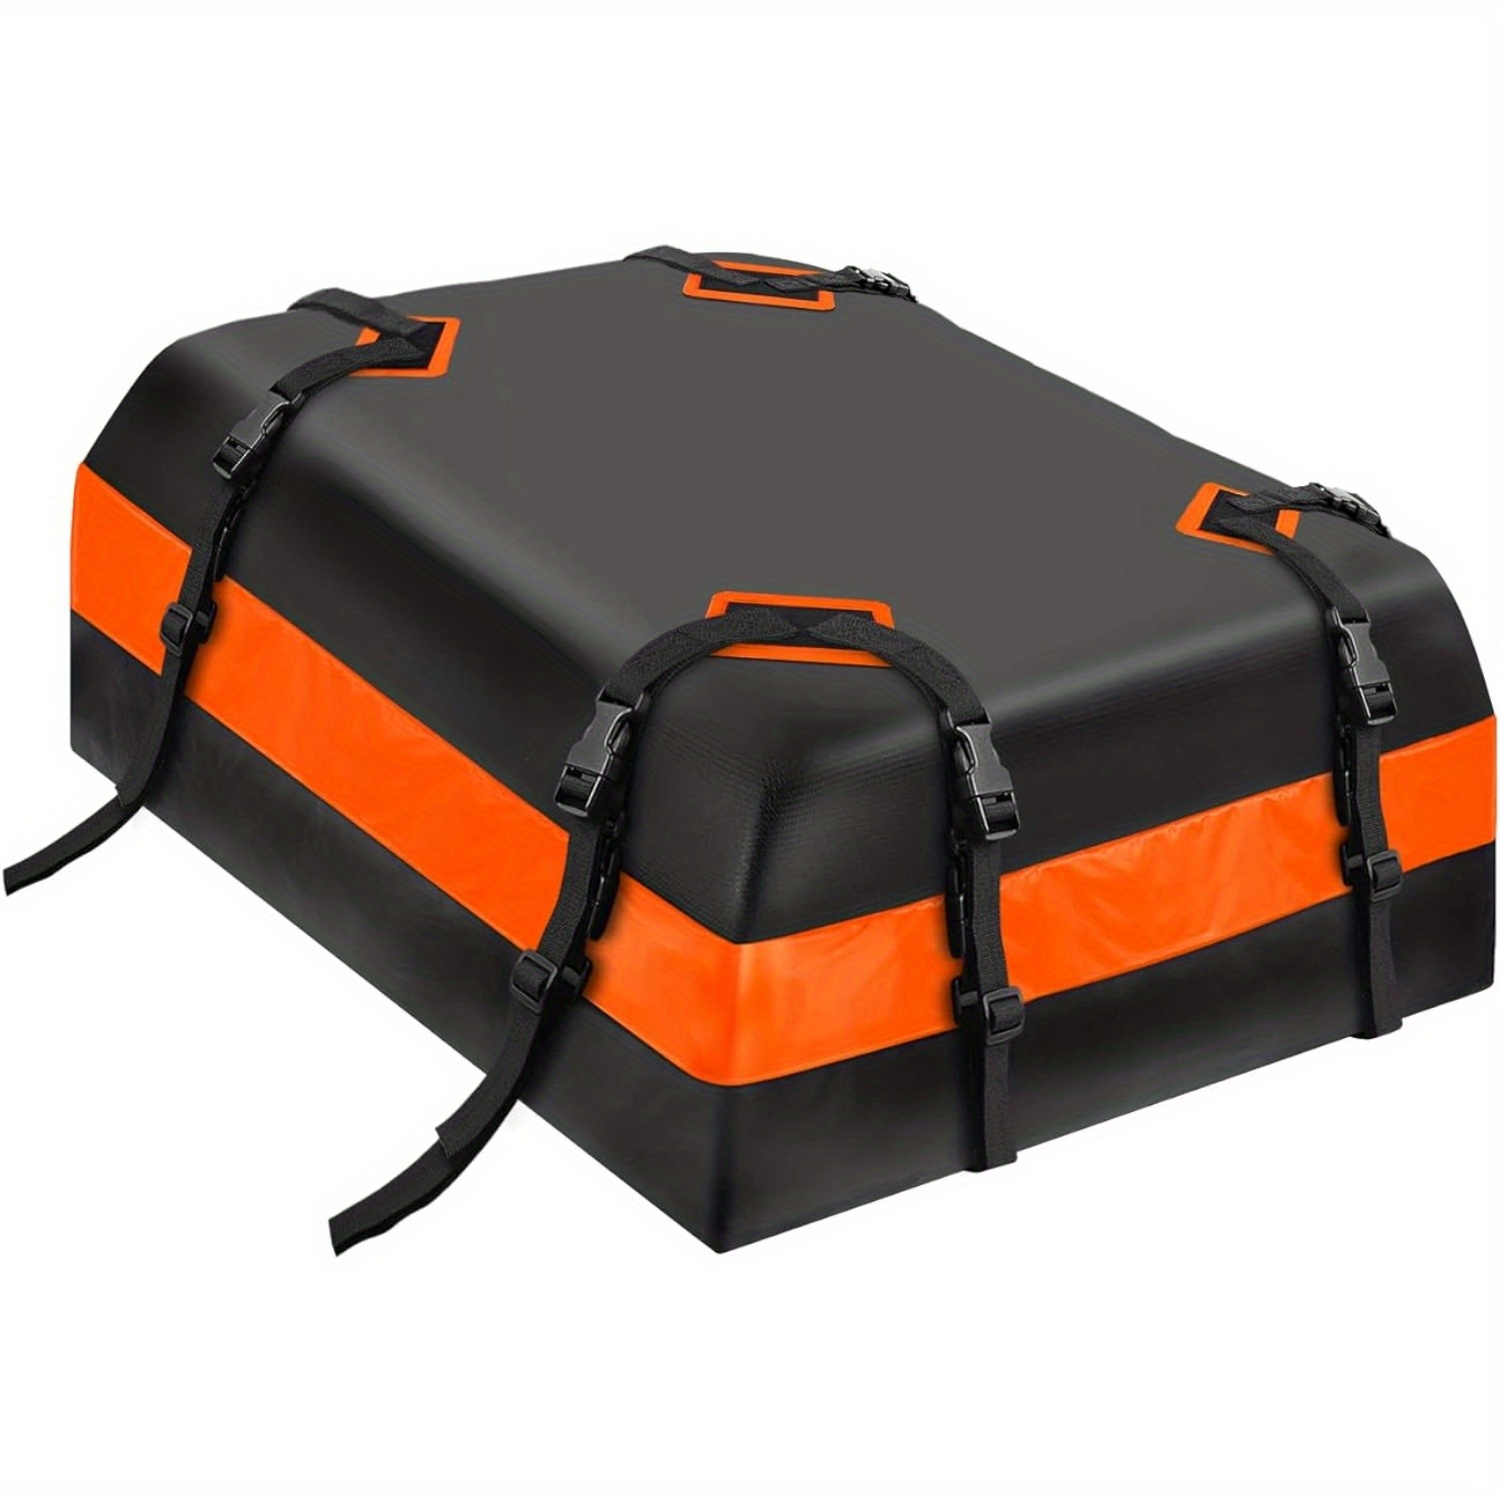 

1pc Car Rooftop Cargo Carrier Roof Bag Waterproof For All Of Vehicle With/without Rack Includes Topper Anti-slip Mat, Reinforced Straps, 6door Hooks, Lock